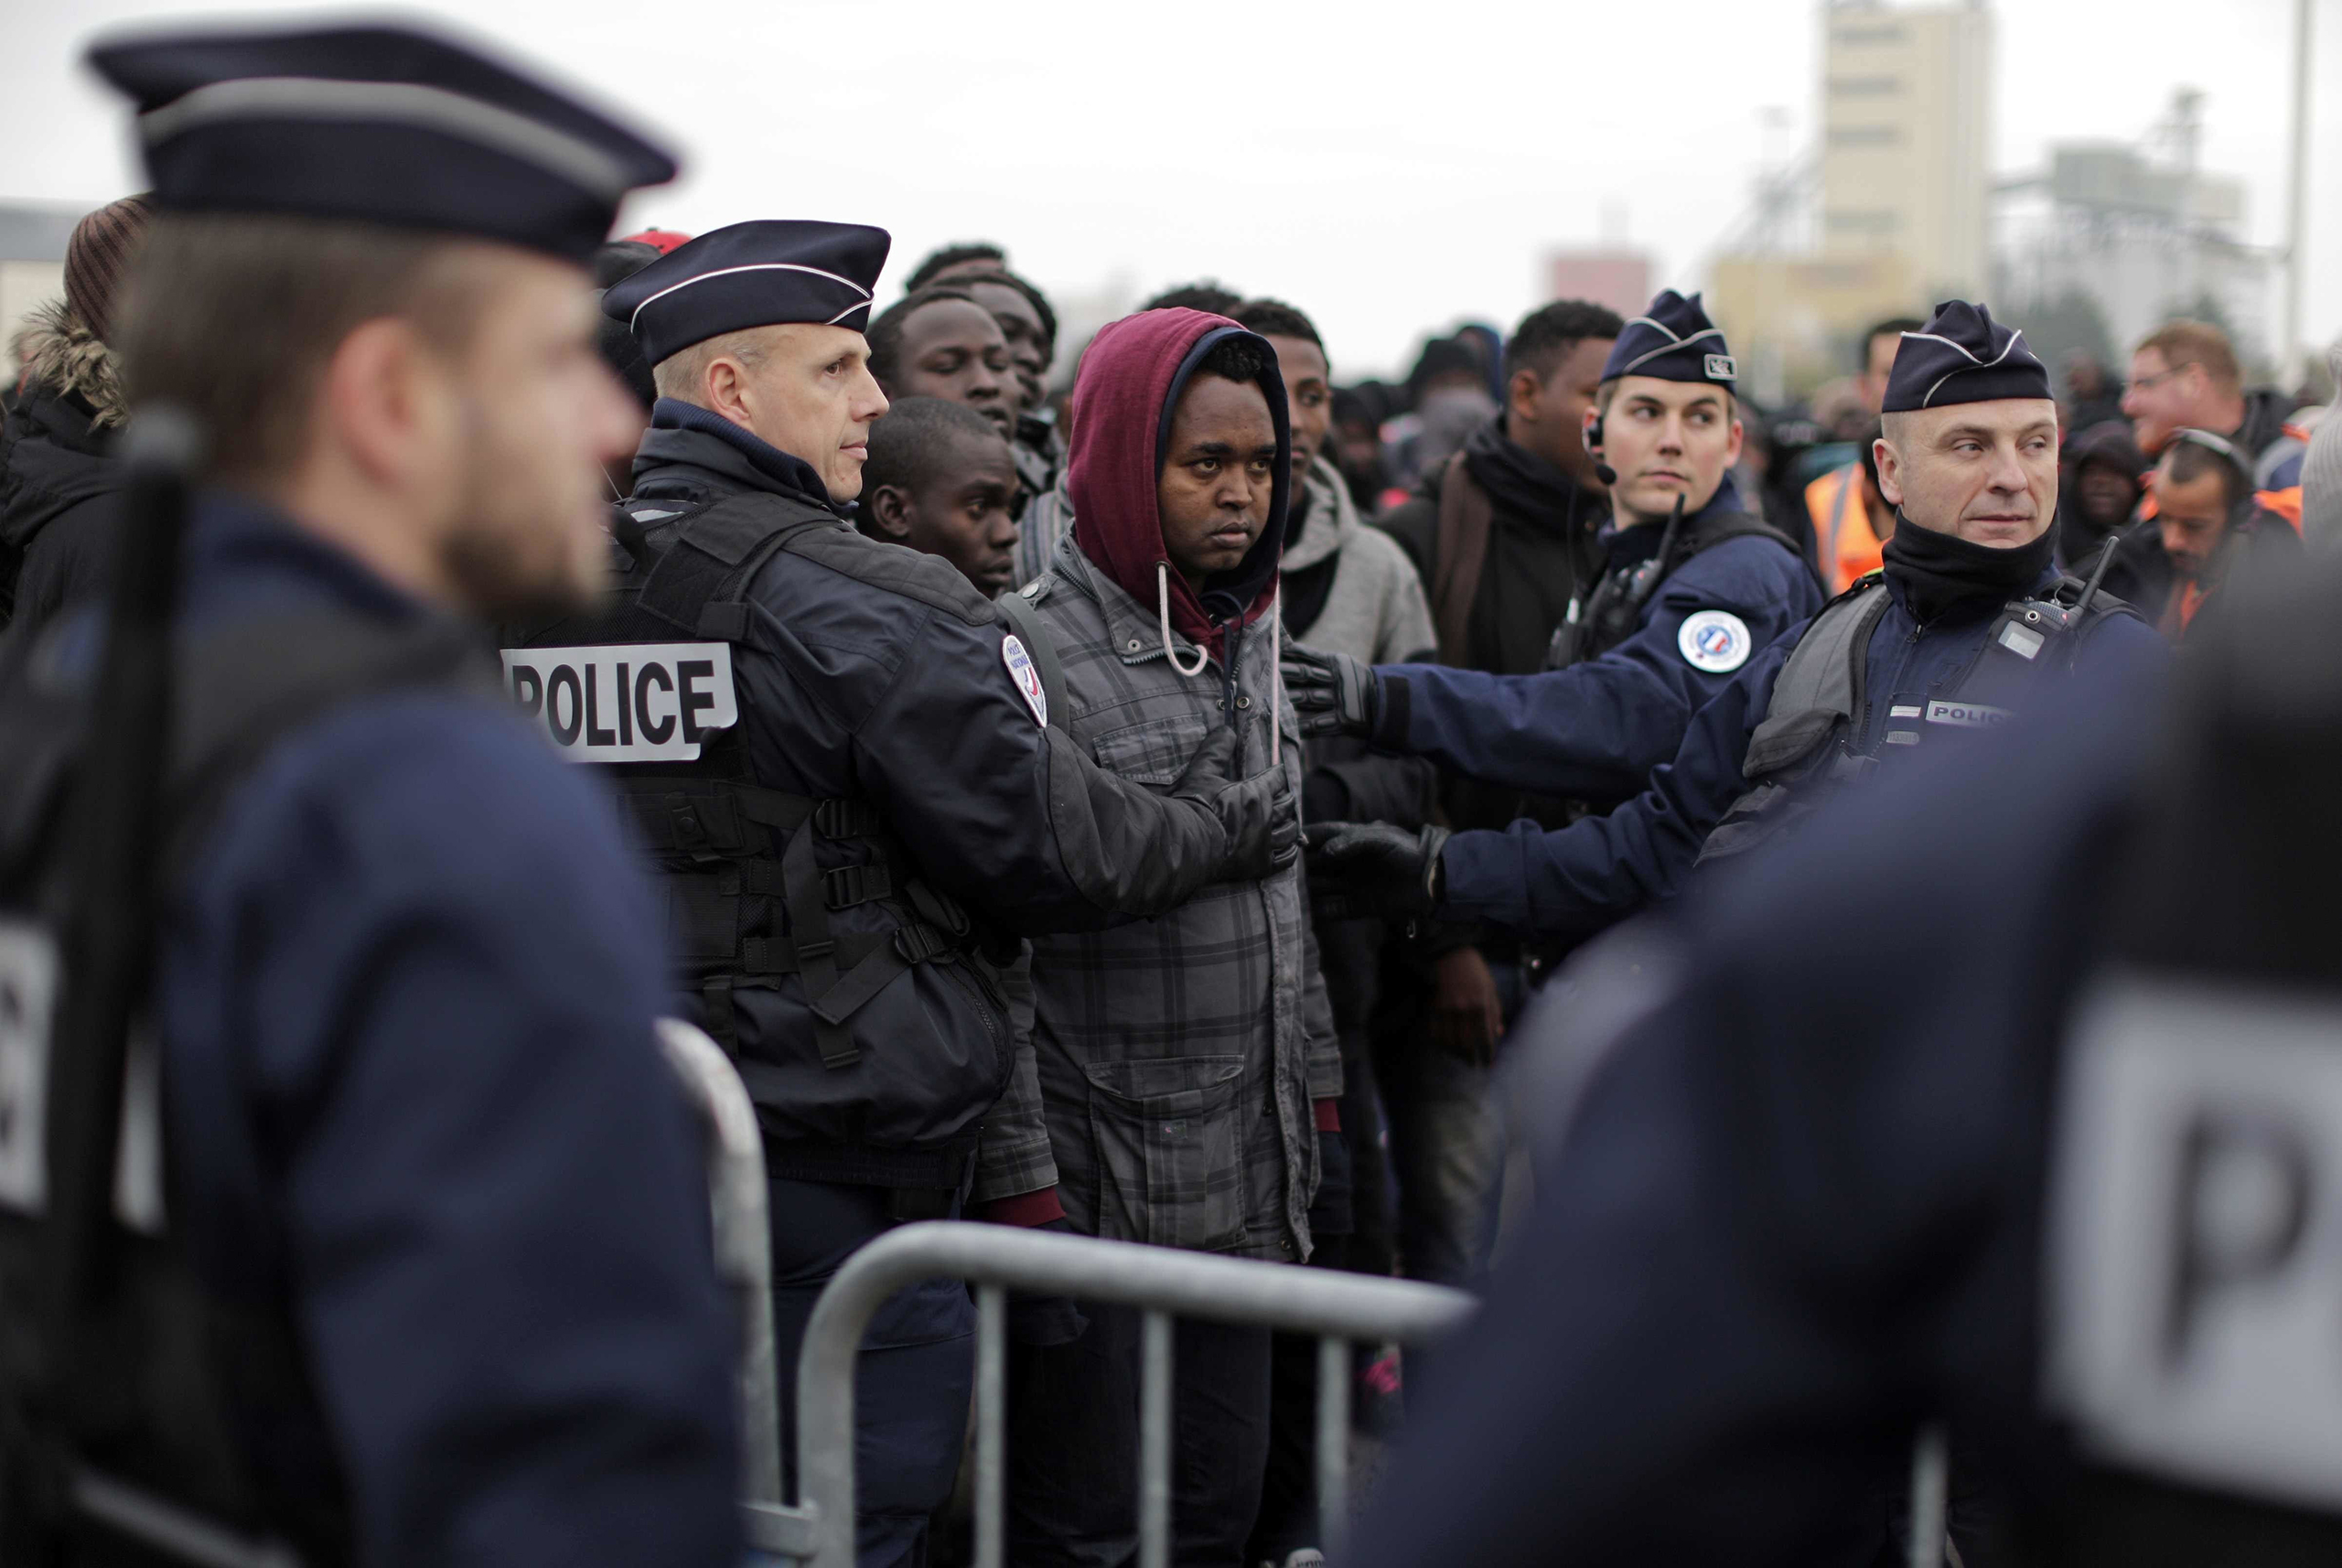 Police officers control a line as migrants line up to register at a processing center in the makeshift migrant camp known as  the Jungle,  near Calais, northern France, on Oct. 24, 2016.